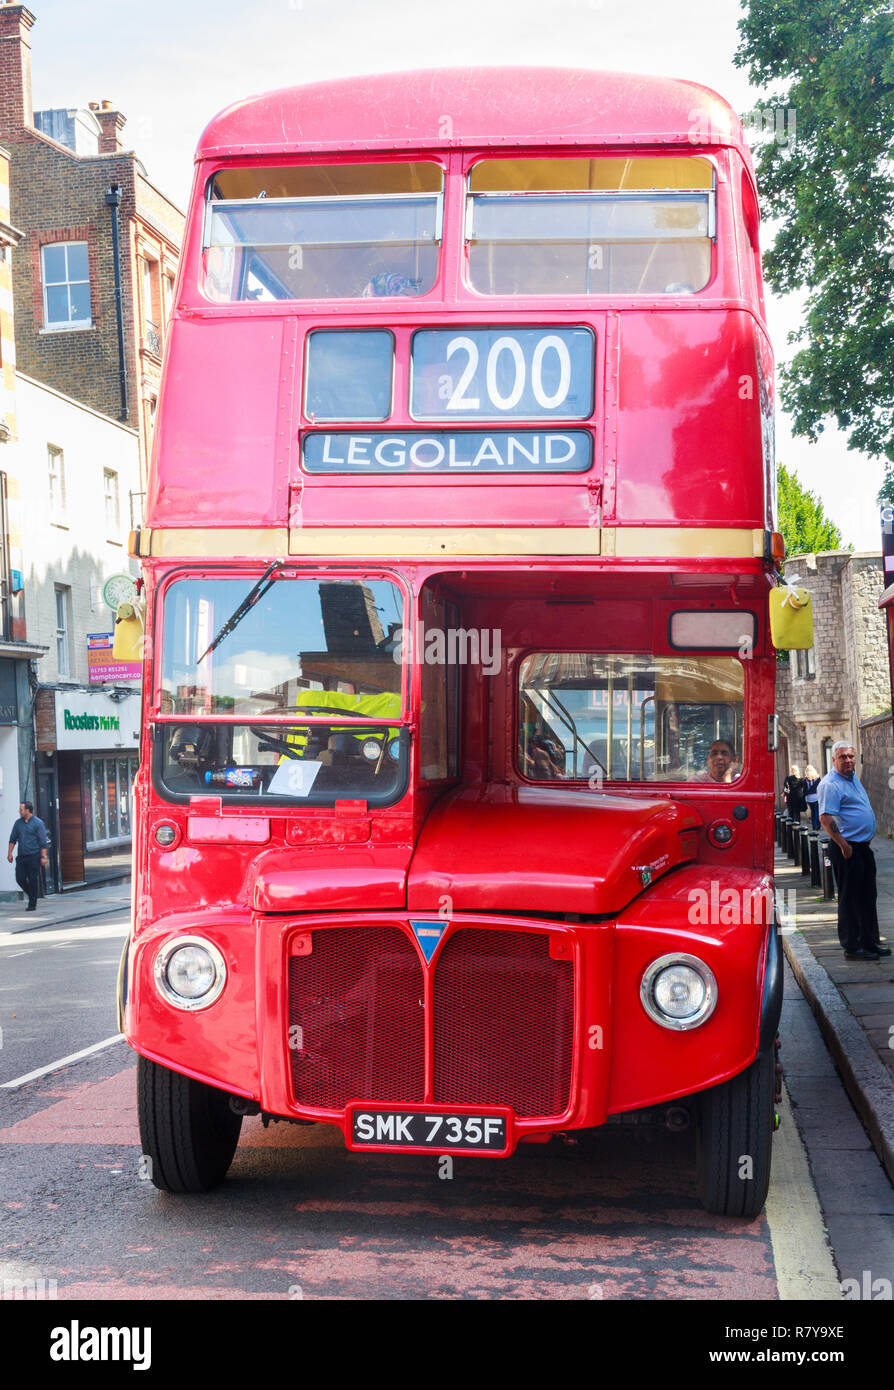 Windsor, England - 1th August 2015: Red double decker bus number 200. The bus is a service to Legoland from Windsor town centre. Stock Photo